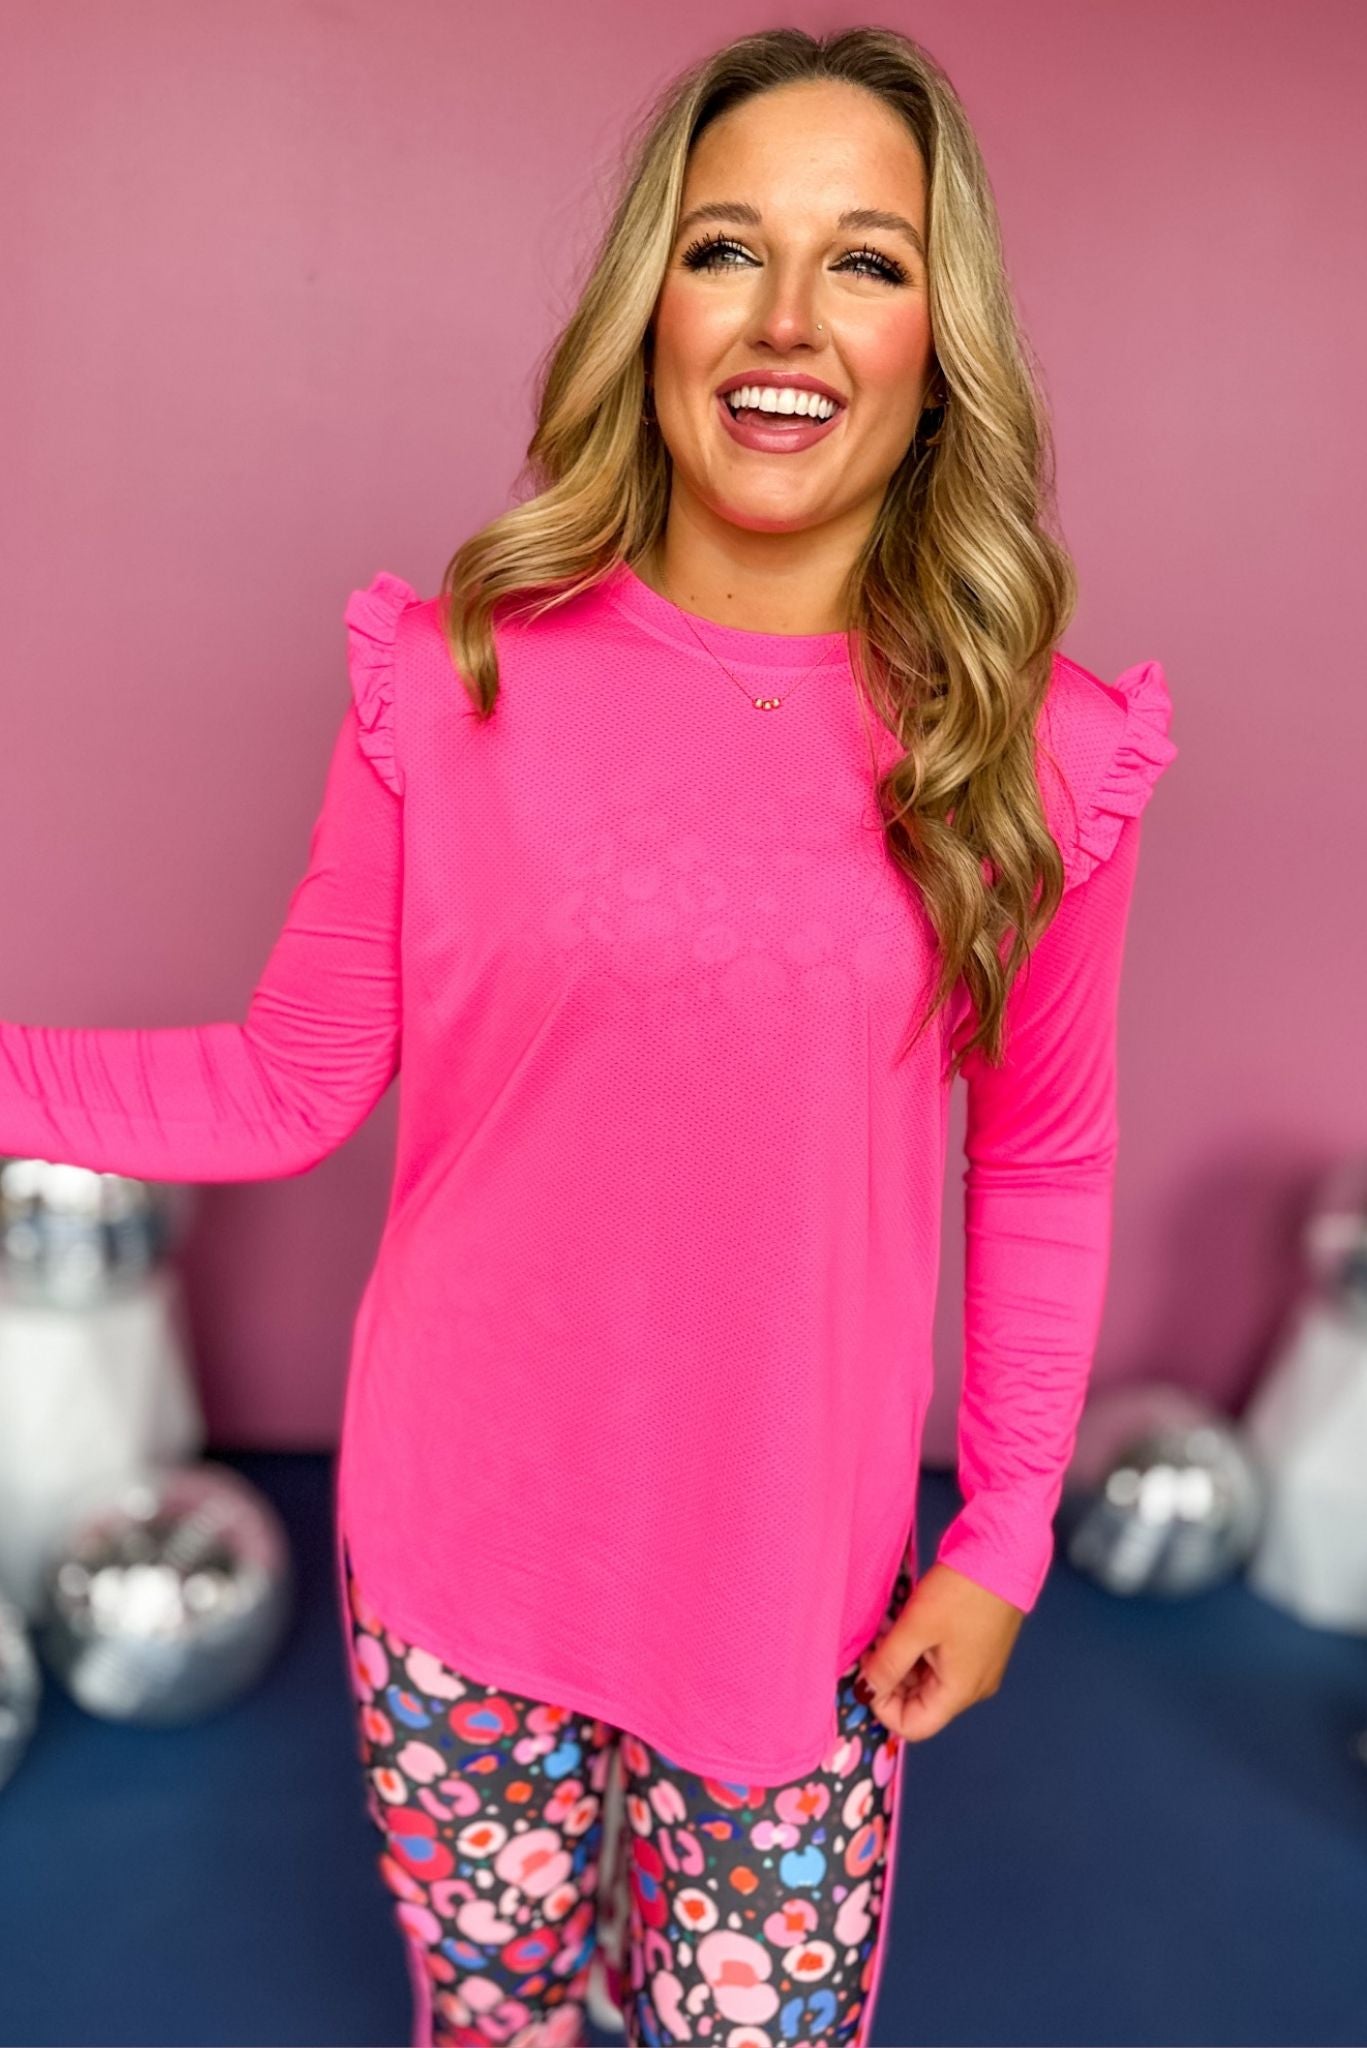 SSYS Hot Pink Long Sleeve Ruffle Hem Active Top, must have top, must have athleisure, elevated style, elevated athleisure, mom style, active style, active wear, fall athleisure, fall style, comfortable style, elevated comfort, shop style your senses by mallory fitzsimmons